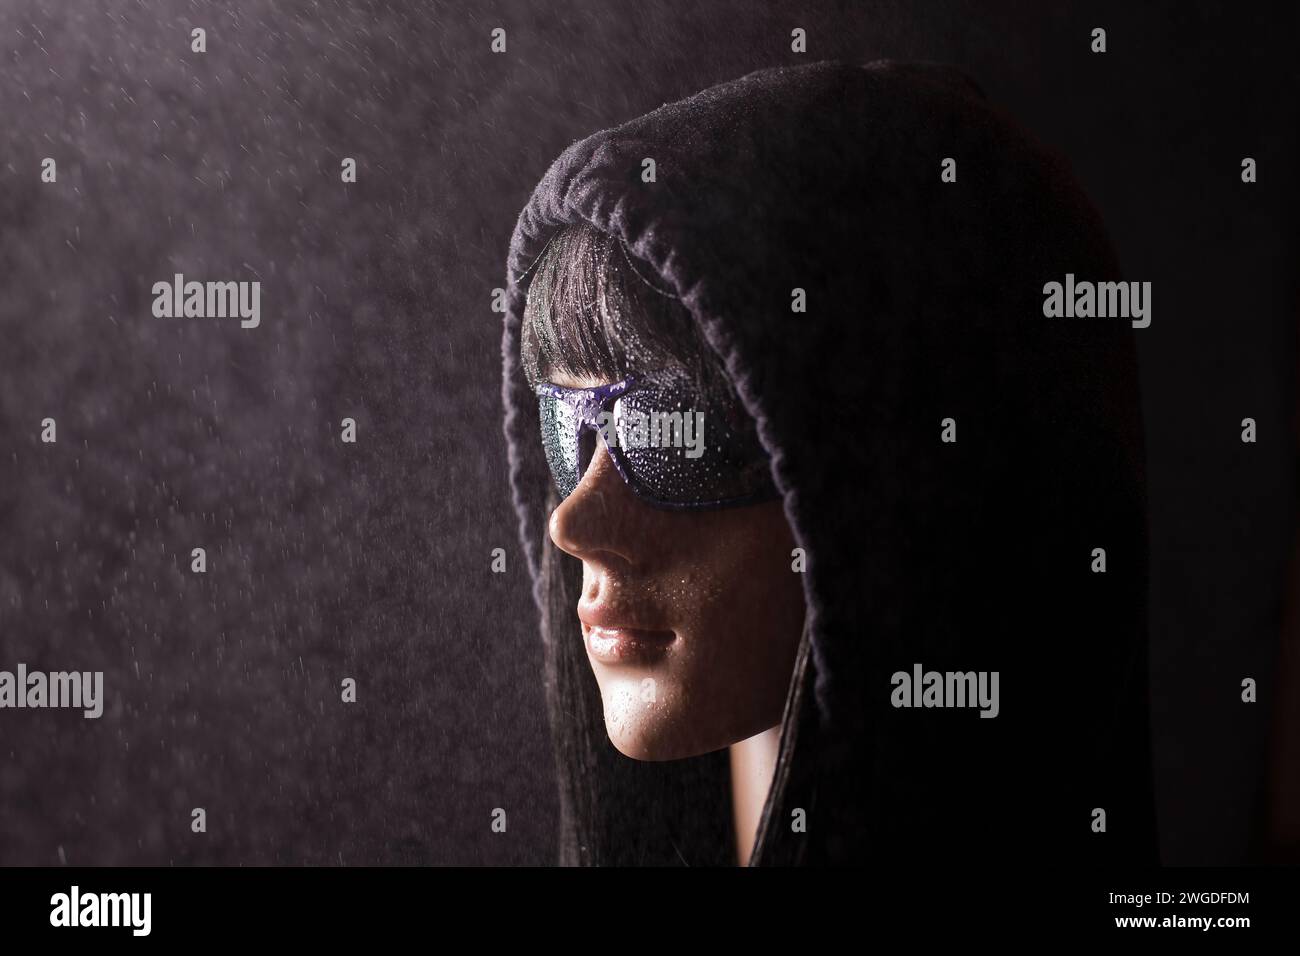 Plastic woman mannequin with black hair wearing a black hoodie and dark sunglasses posing on a black background in the mist Stock Photo